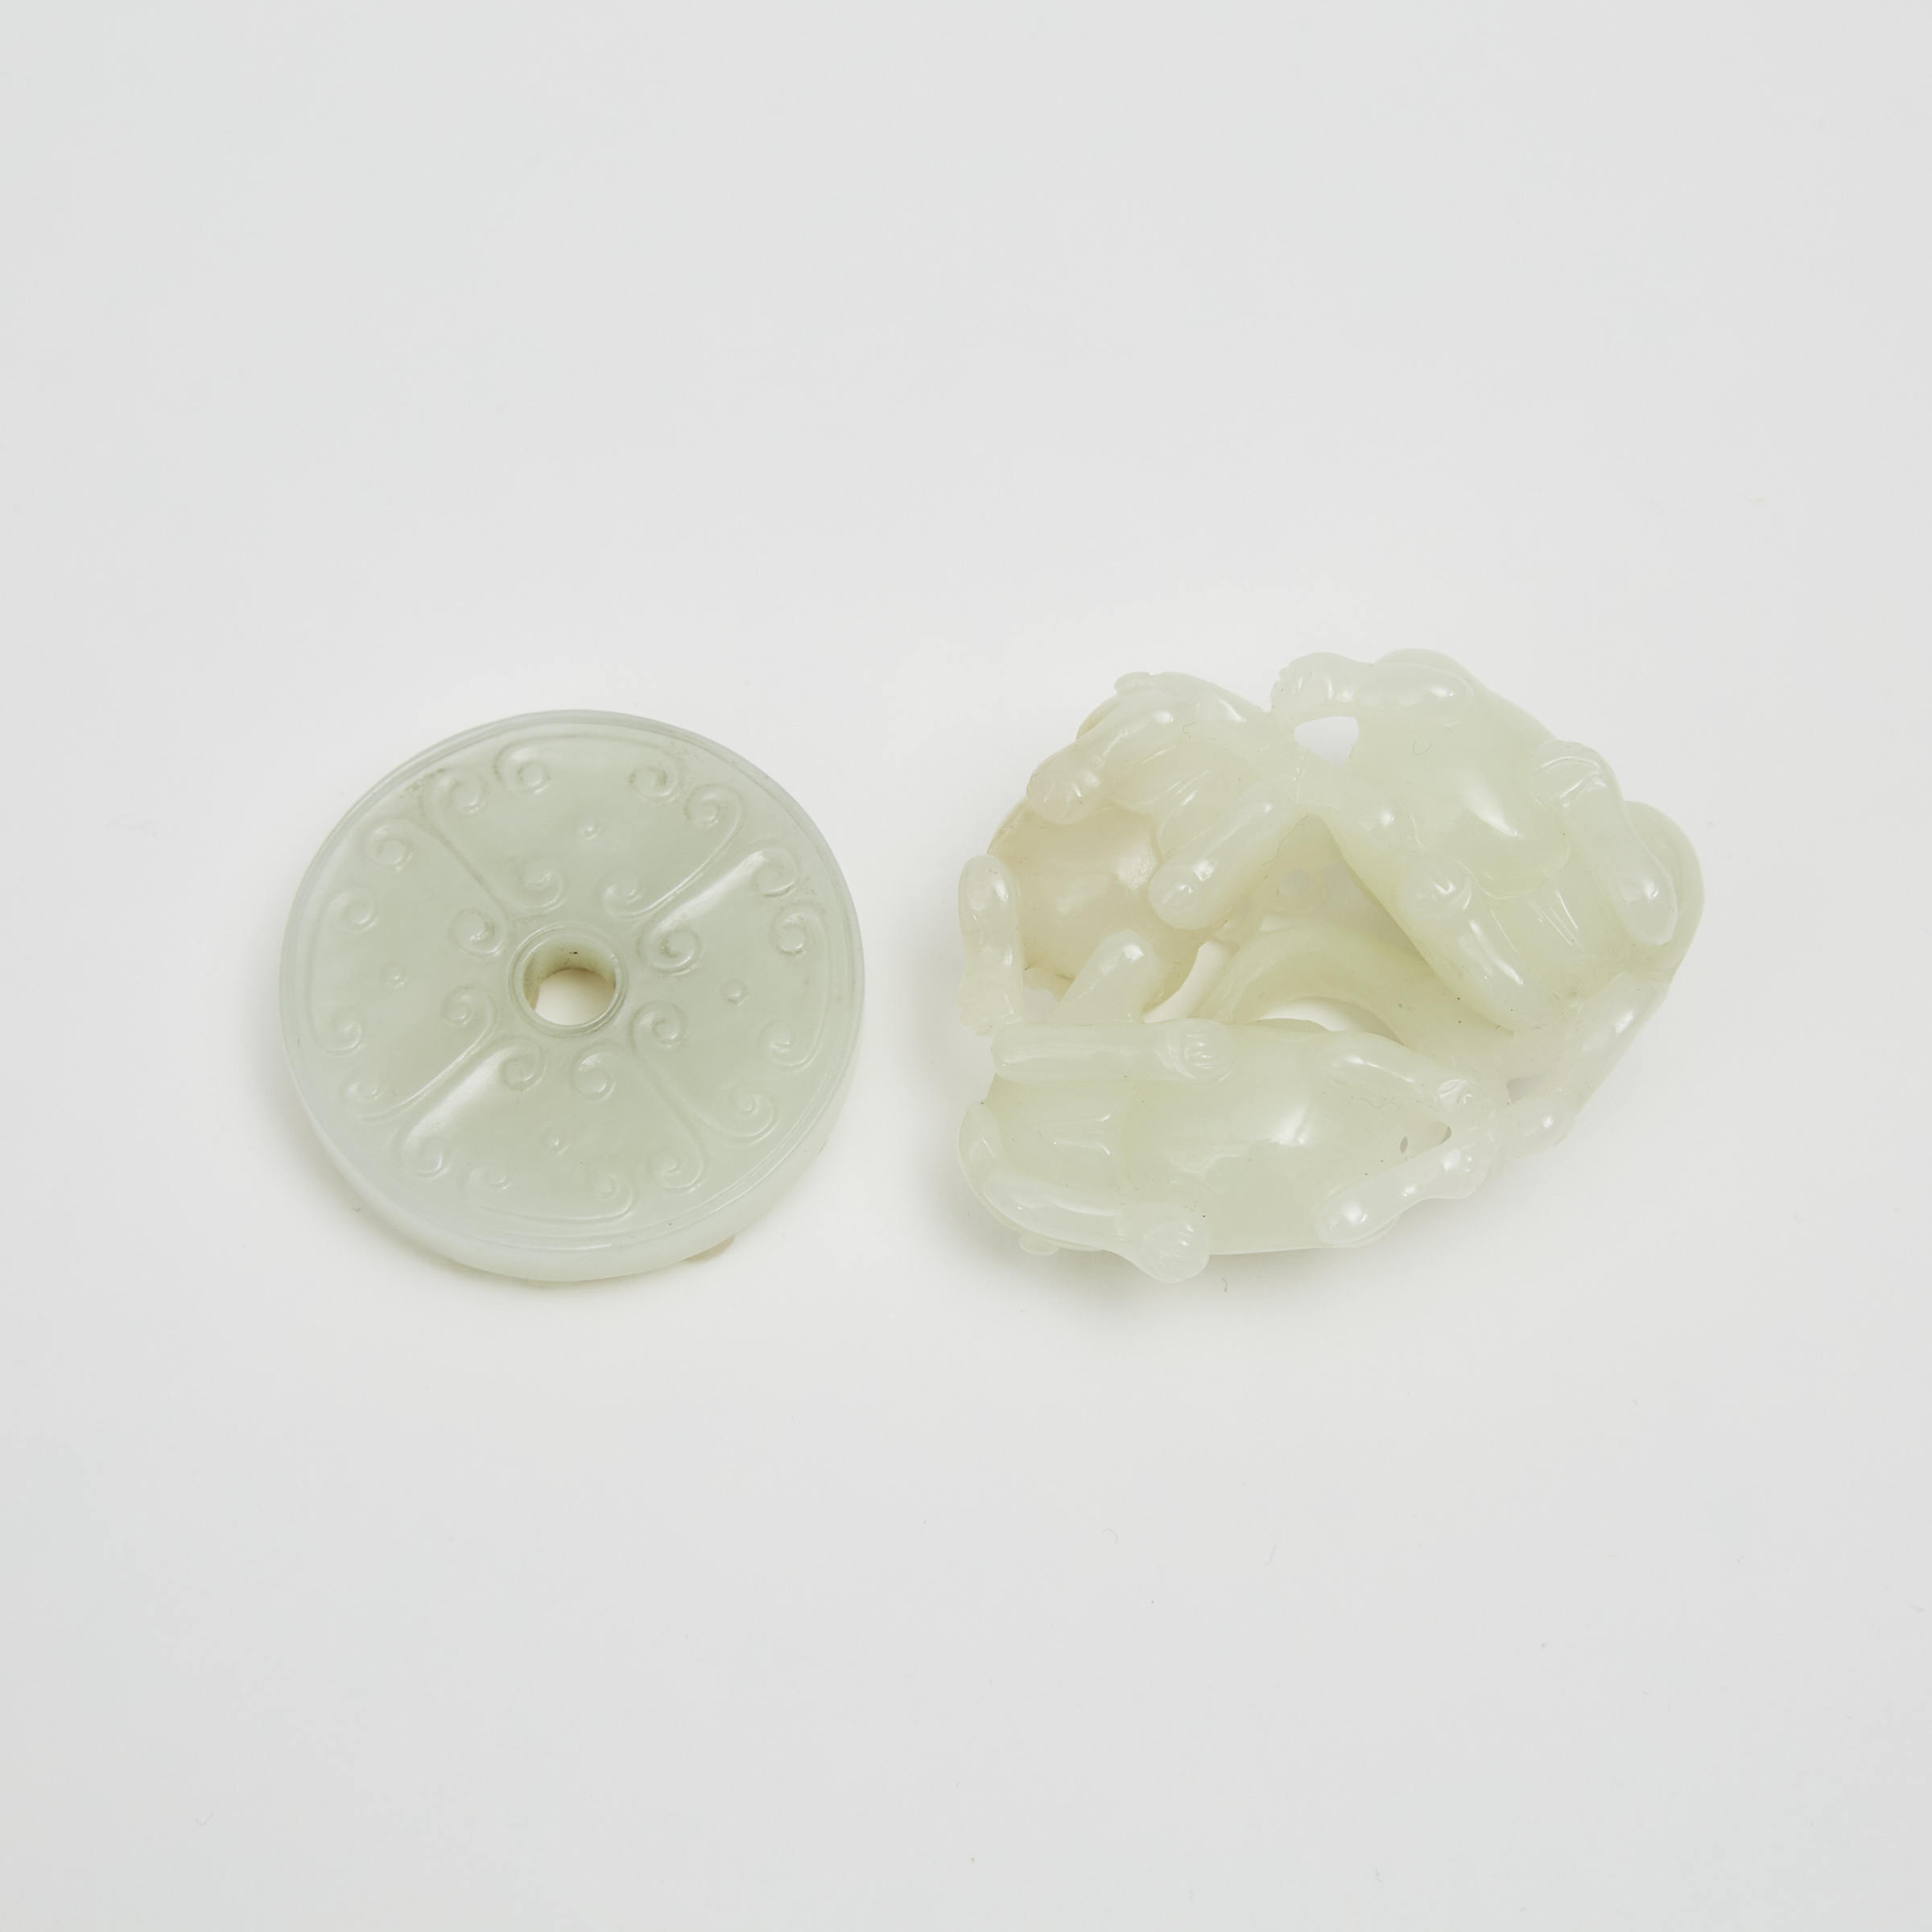 A White Jade 'Cats' Group and a Pale Celadon Jade and Russet 'Chi-Dragon' Bi Disc